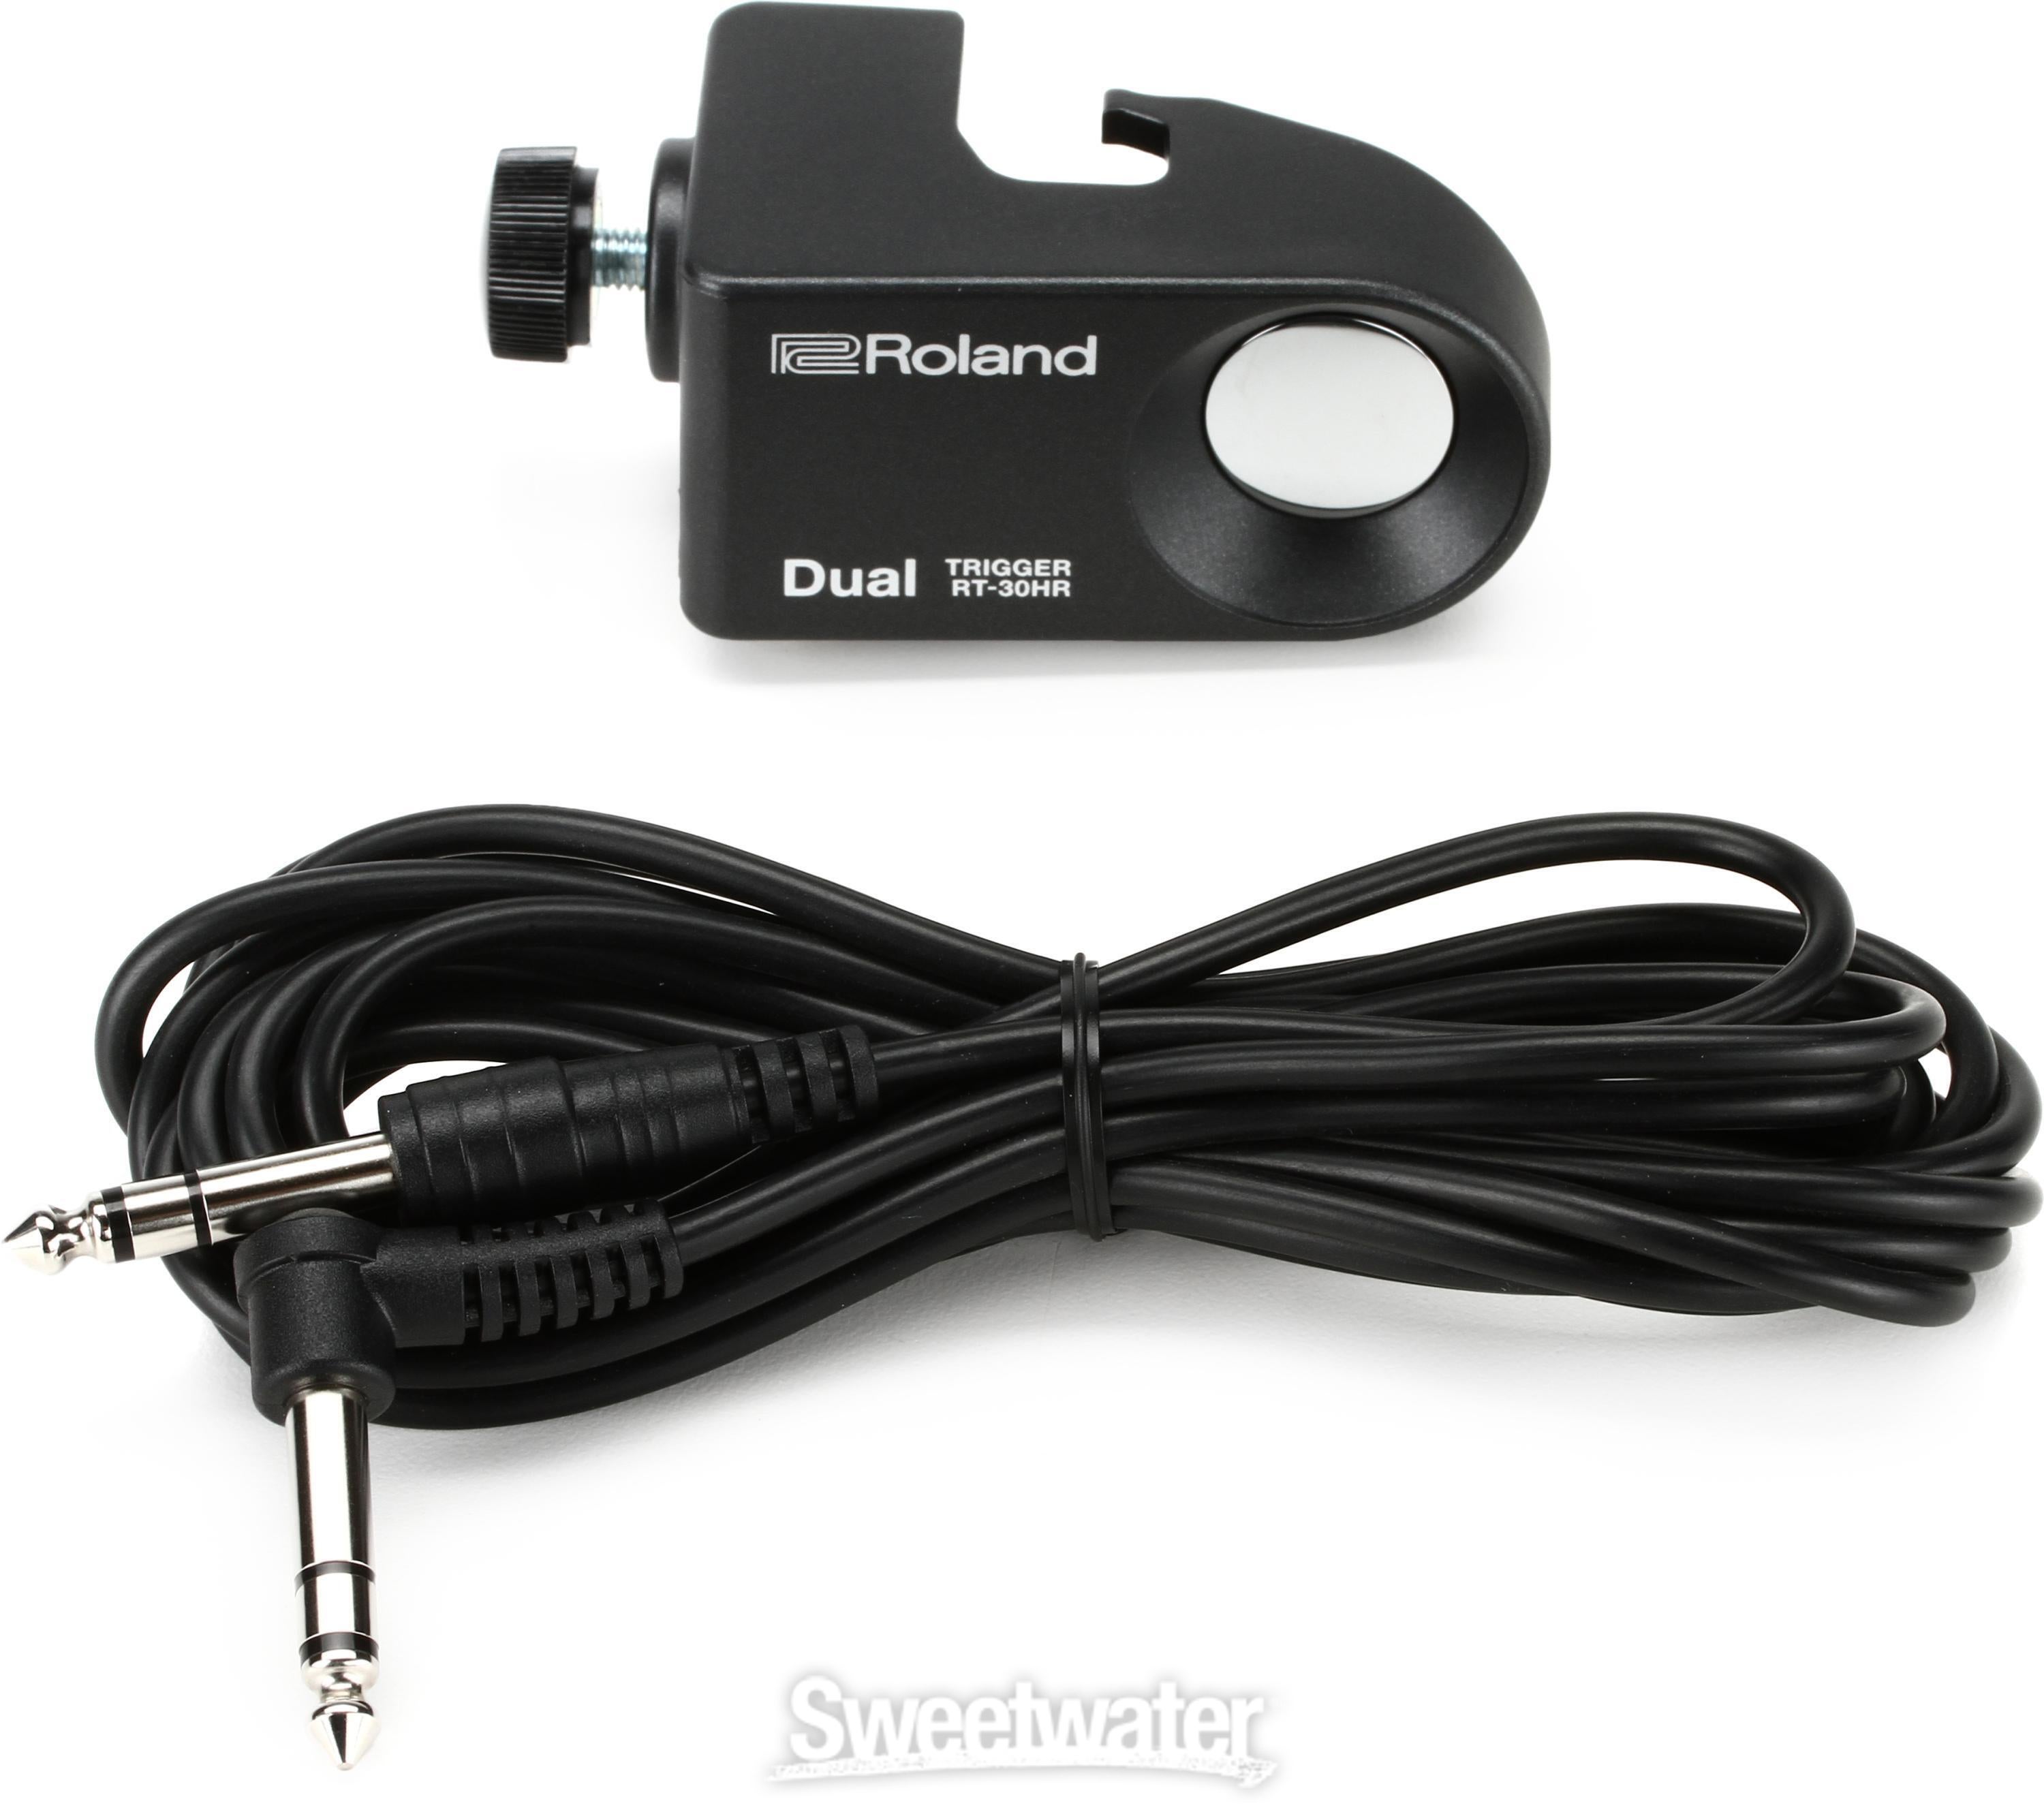 Roland RT-30HR Dual Zone Acoustic Drum Trigger Reviews | Sweetwater